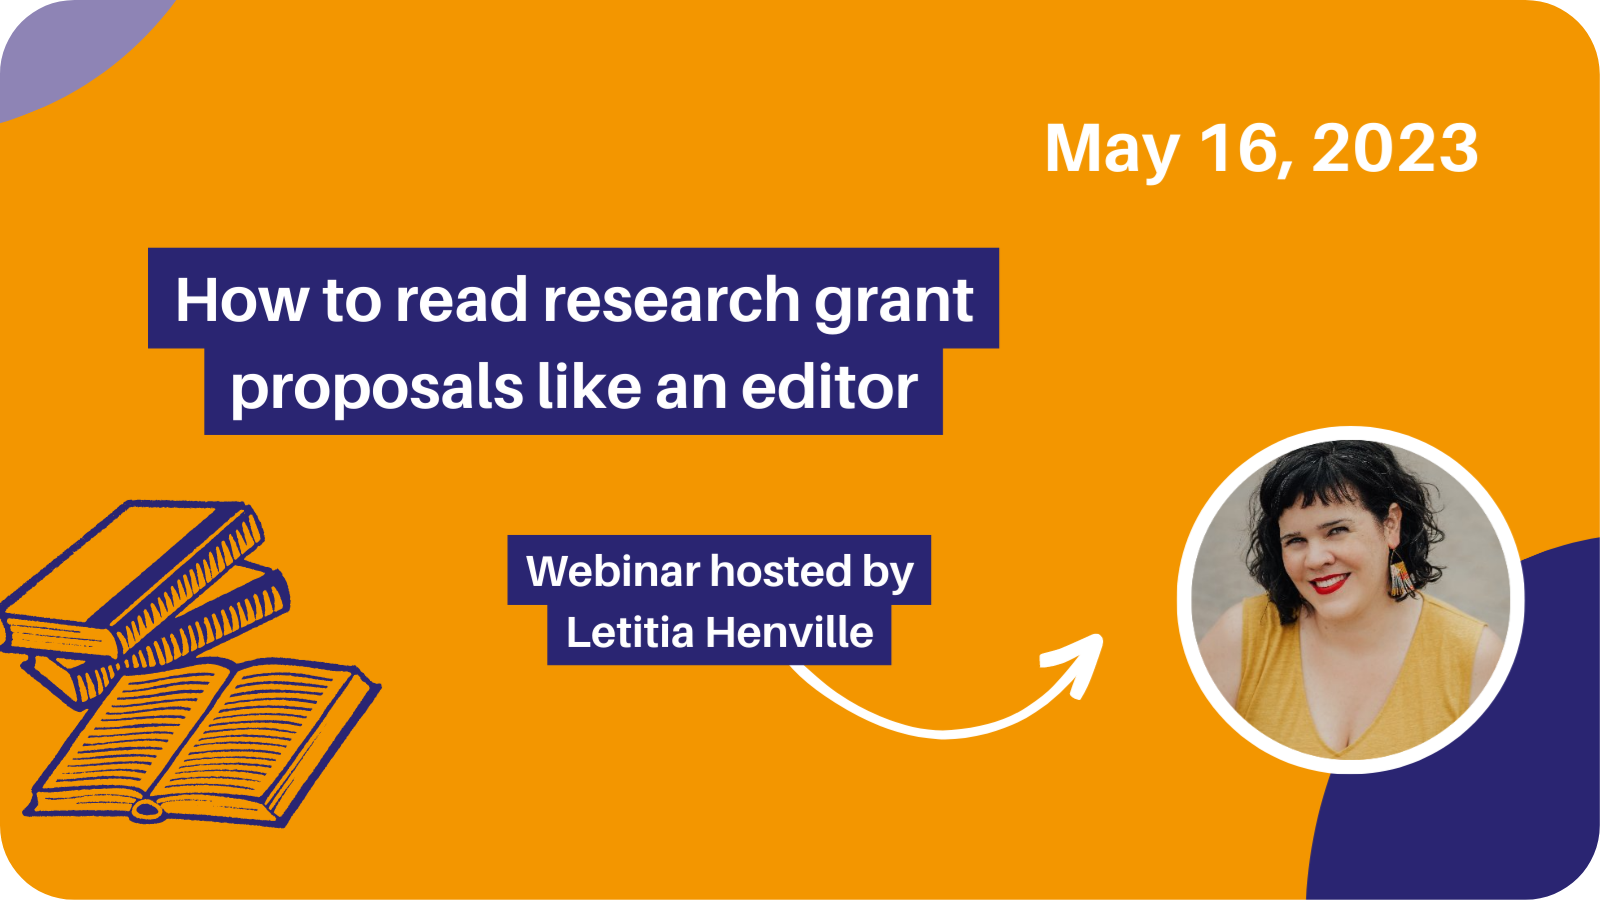 How to read research grant proposals like an editor webinar